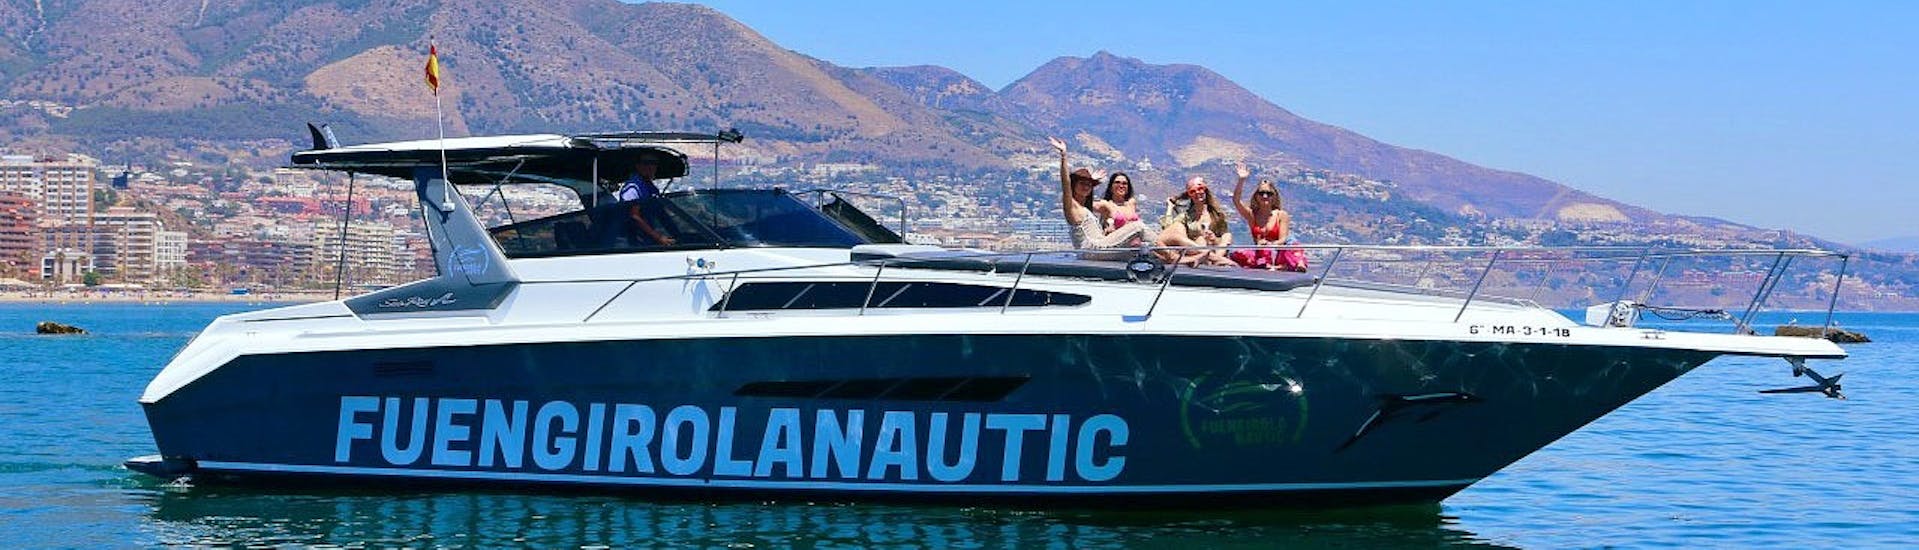 Picture of our boat during a Yacht Rental in Fuengirola (up to 12 people) with Fuengirolanautic.